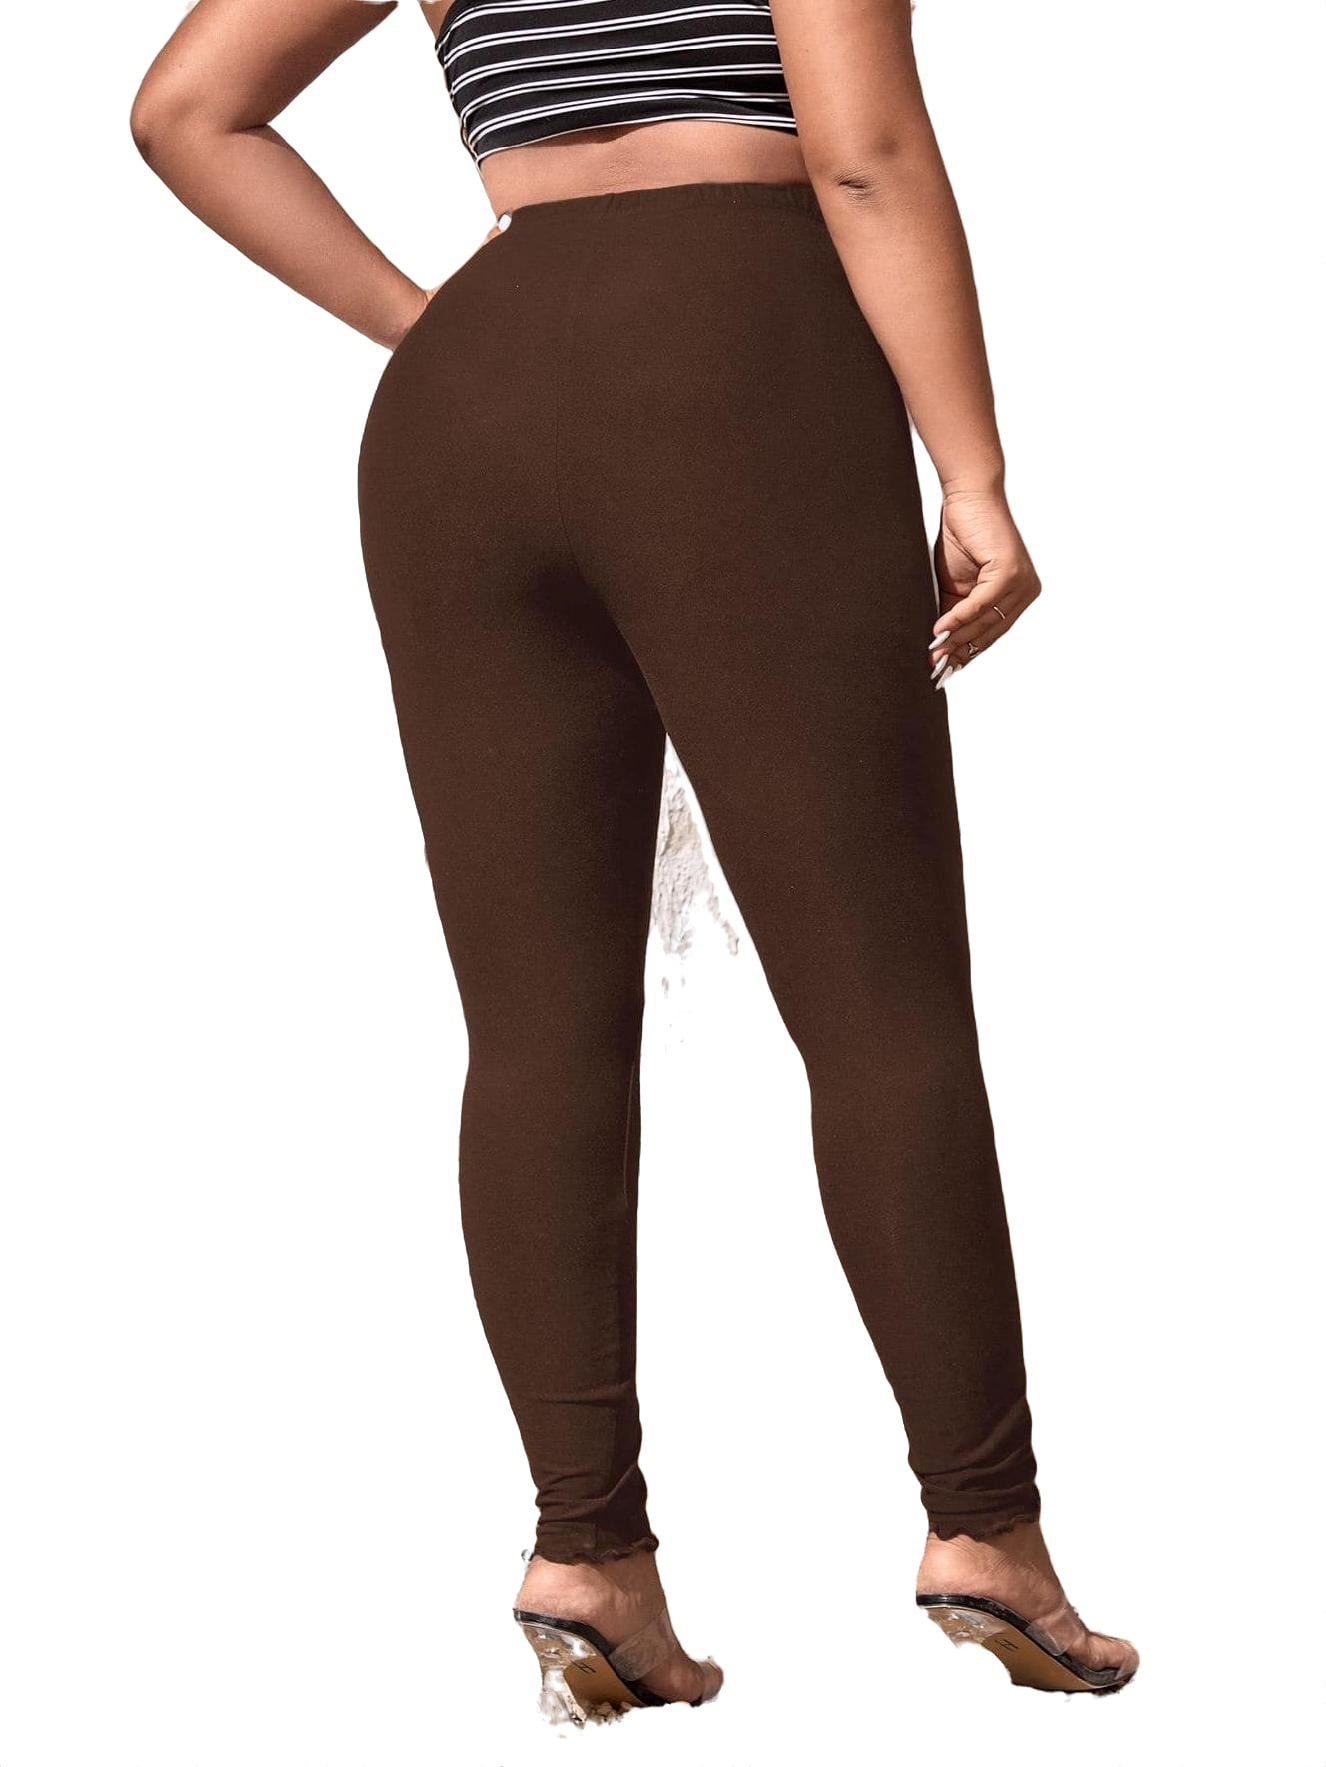 Buy Sanjanaa Diamond Women's Chocolate Brown Leggings 95% Cotton & 5% Lycra  Excellent Four Way Stretch, Size: XL at Amazon.in